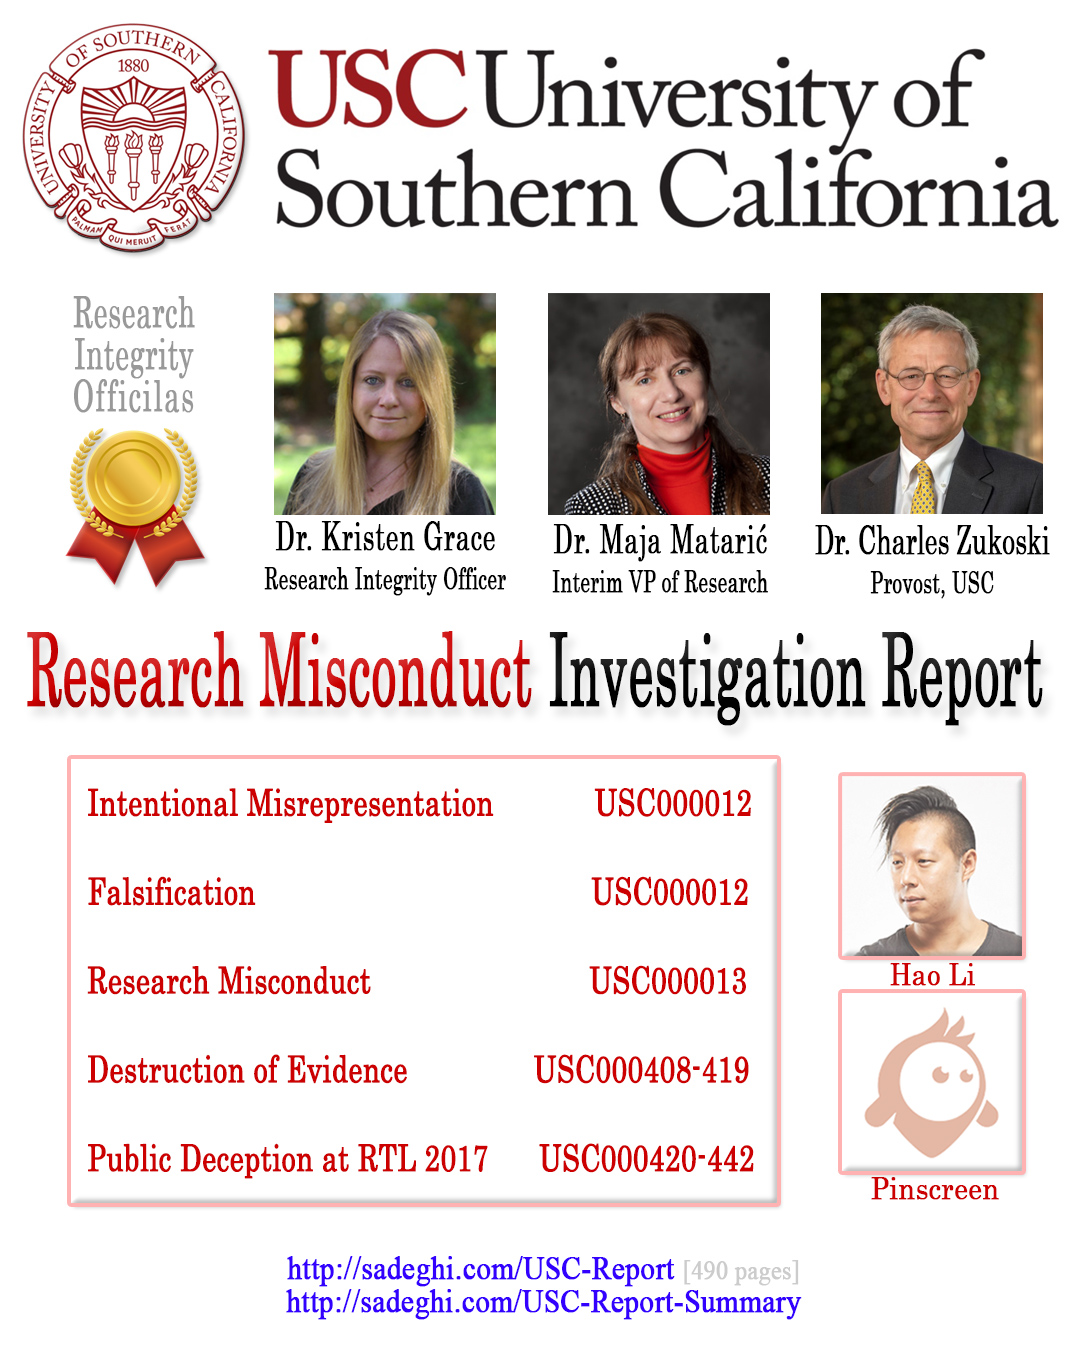 USC's Investigation Report re Hao Li's and Pinscreen's Scientific Misconduct at ACM SIGGRAPH RTL 2017 [Summary]